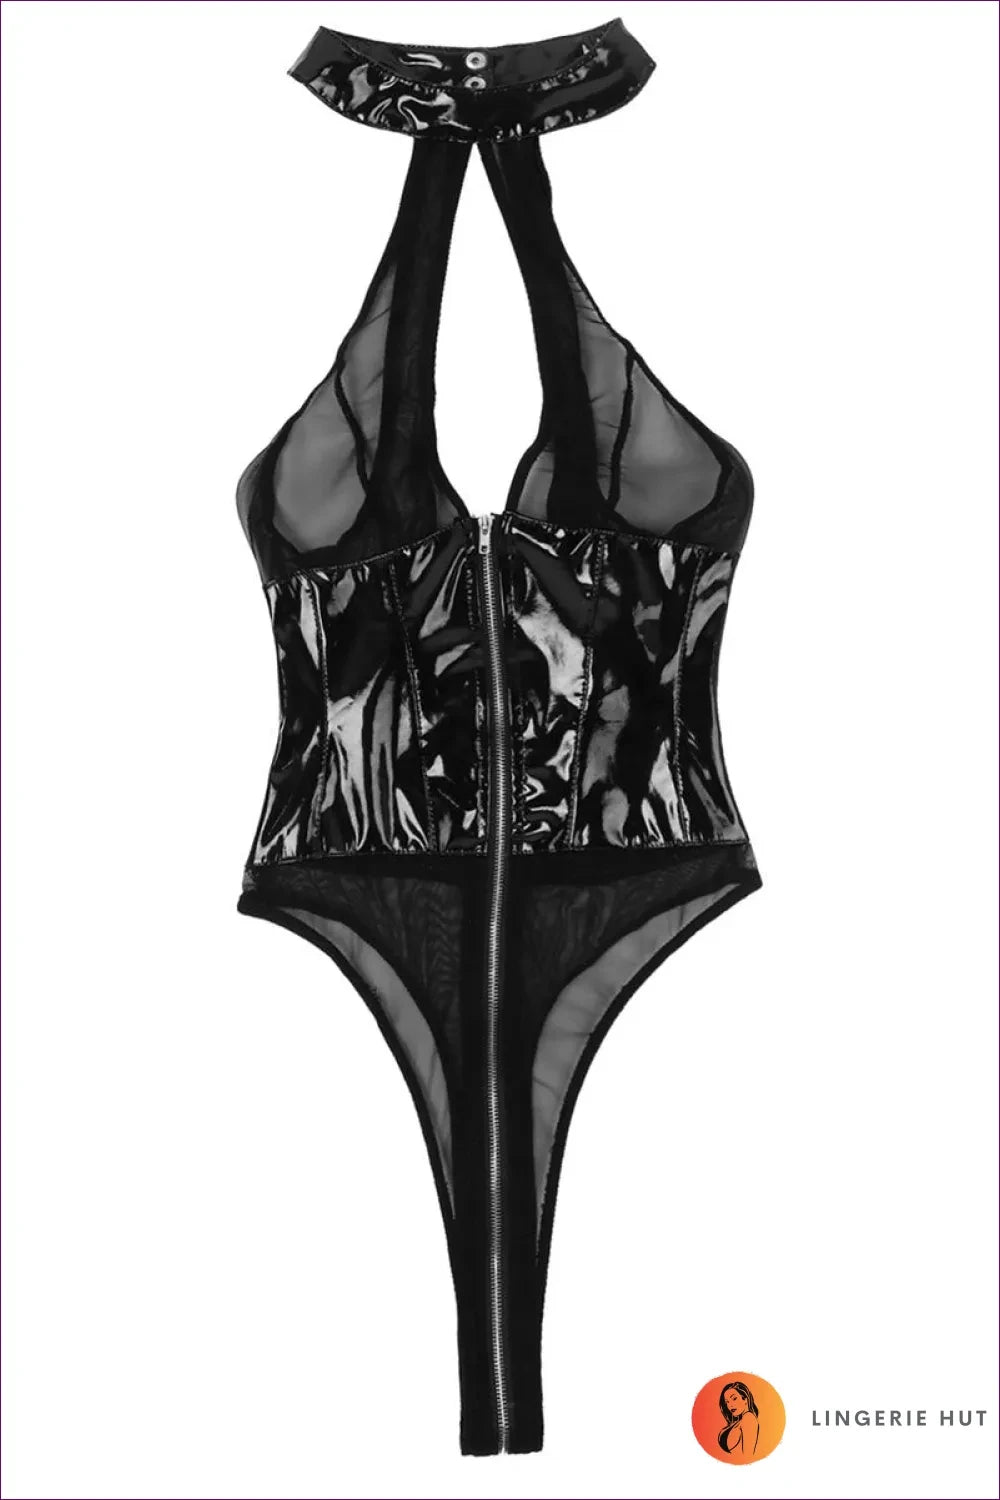 Ignite The Night With Lingerie Hut’s Sexy See-through Mesh Bodysuit. Zipper Halter Meets High-cut Elegance.